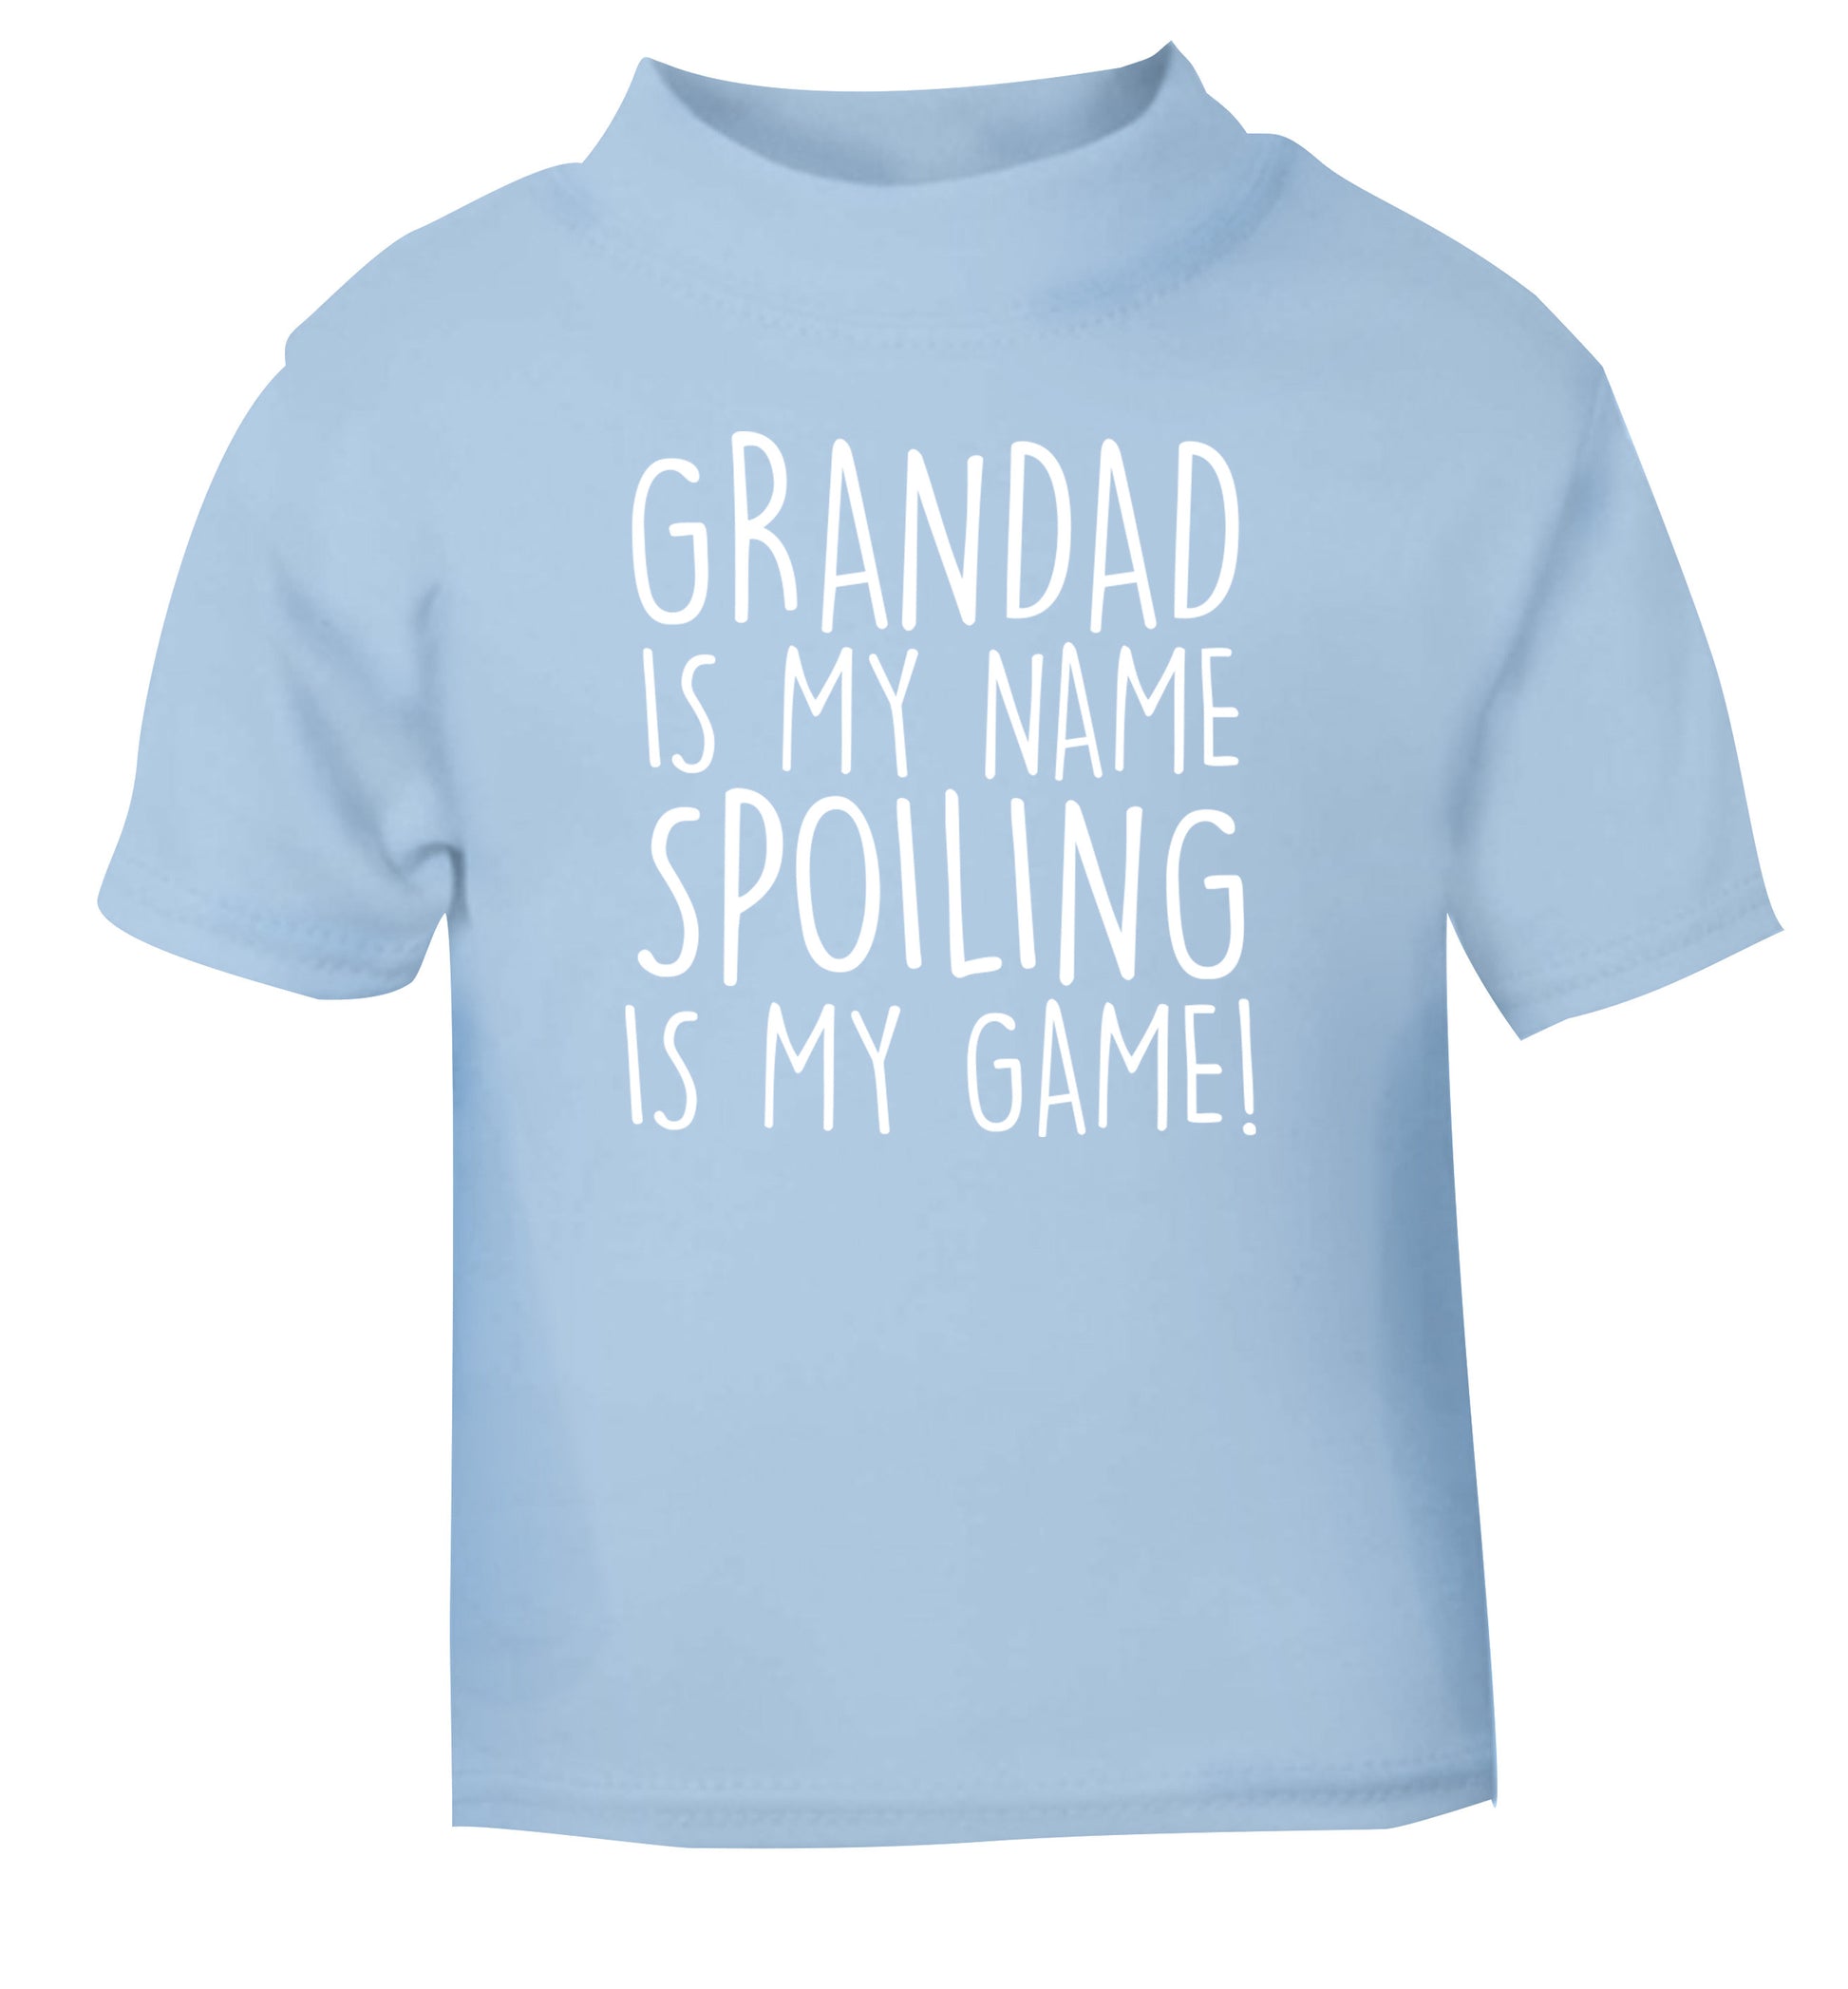 Grandad is my name, spoiling is my game light blue Baby Toddler Tshirt 2 Years